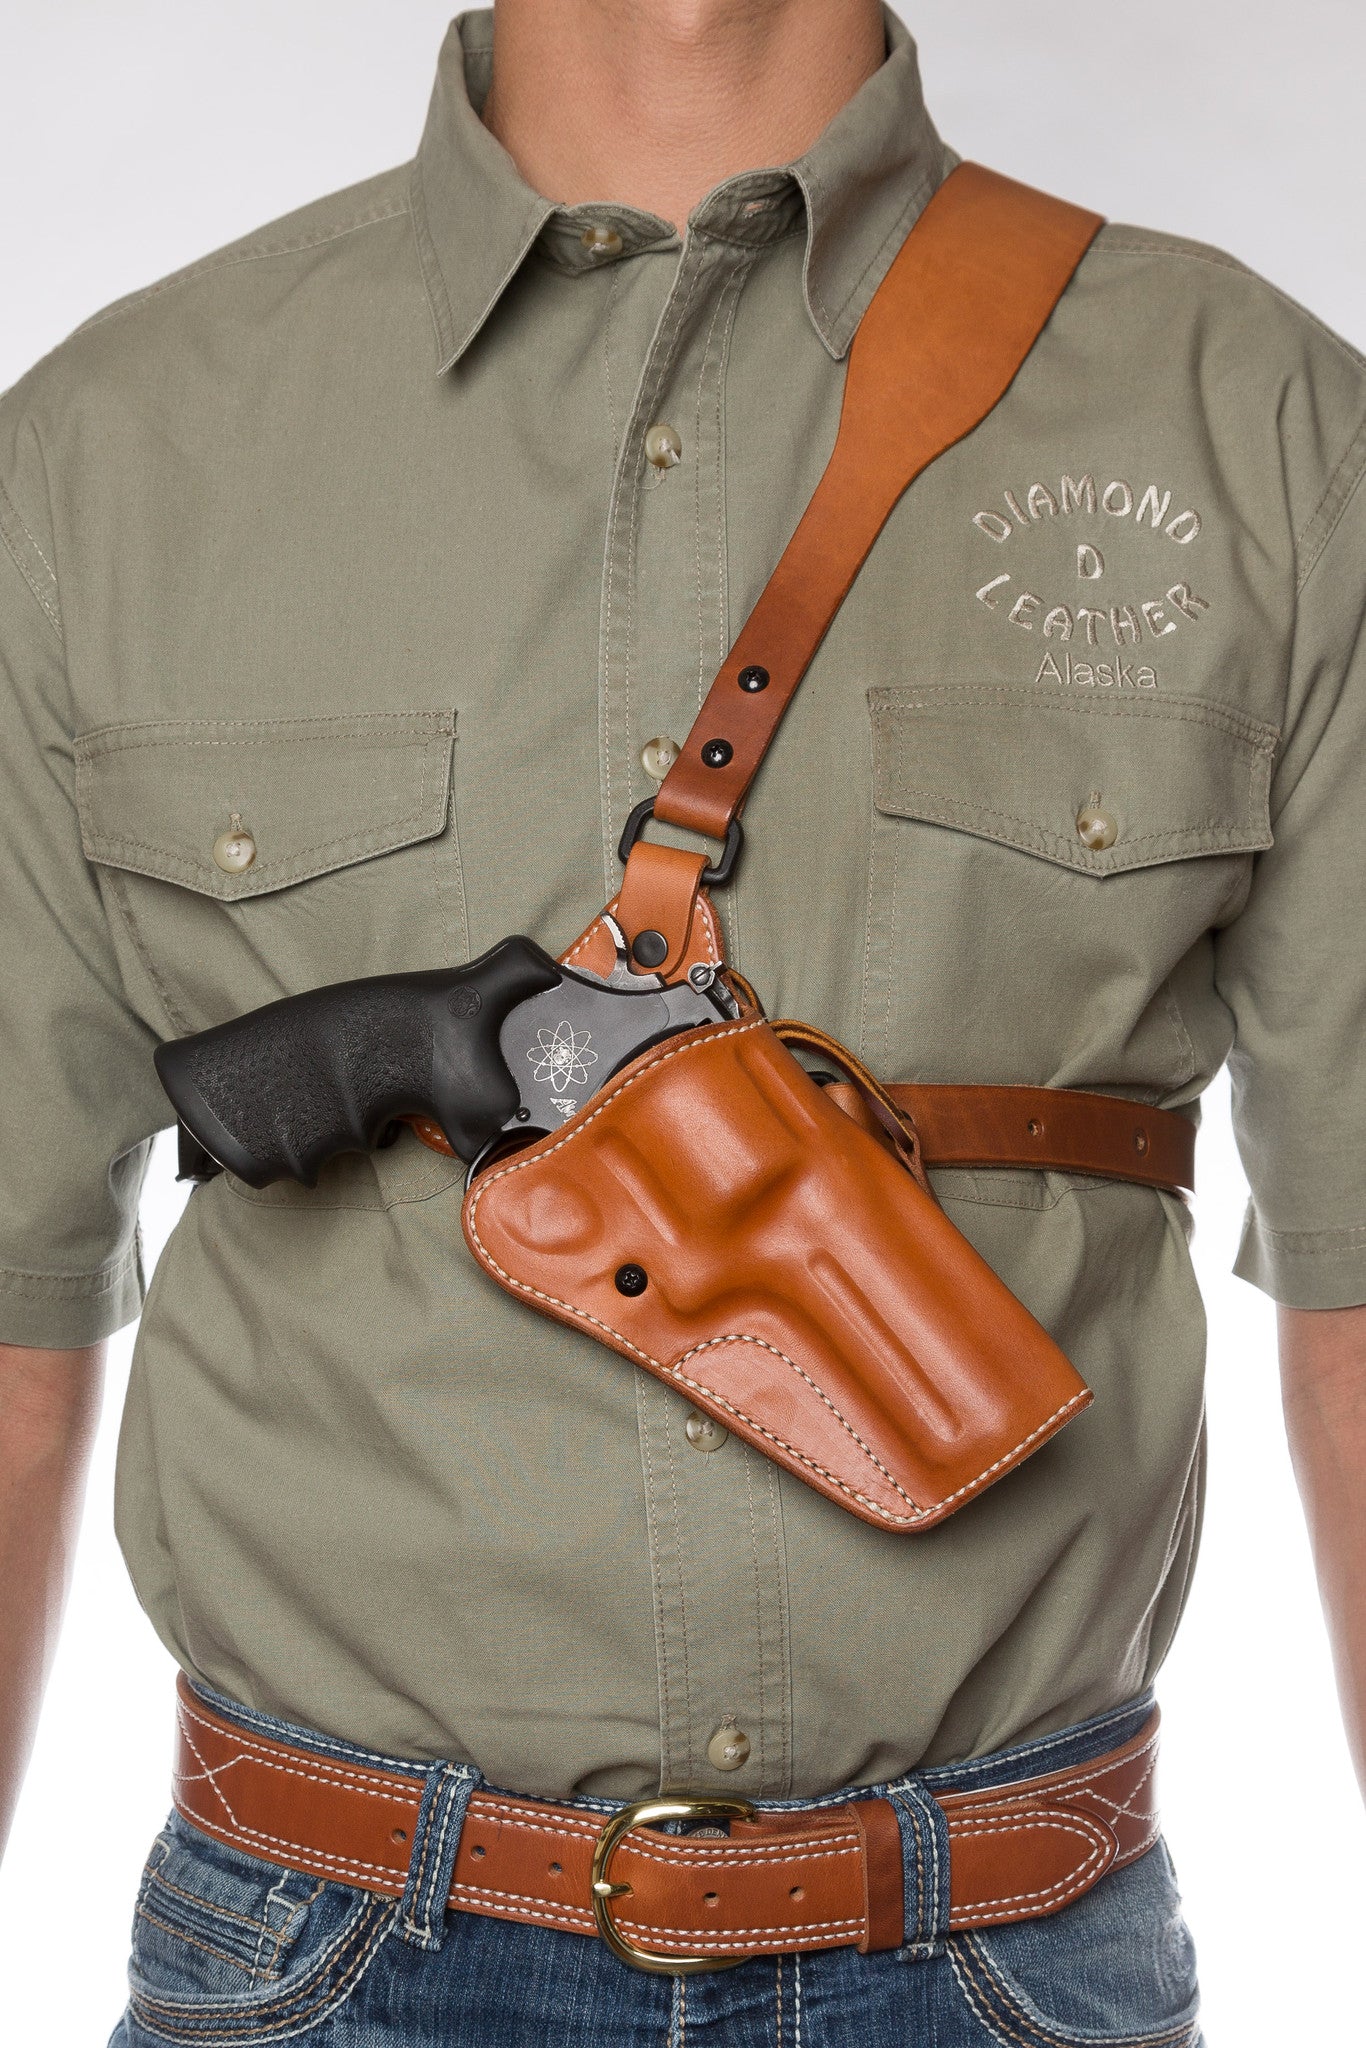 Due Bloodstained kulhydrat Guides Choice™ Leather Chest Holster, the ULTIMATE outdoor gun holster |  Diamond D Custom Leather | Handmade Leather Holsters